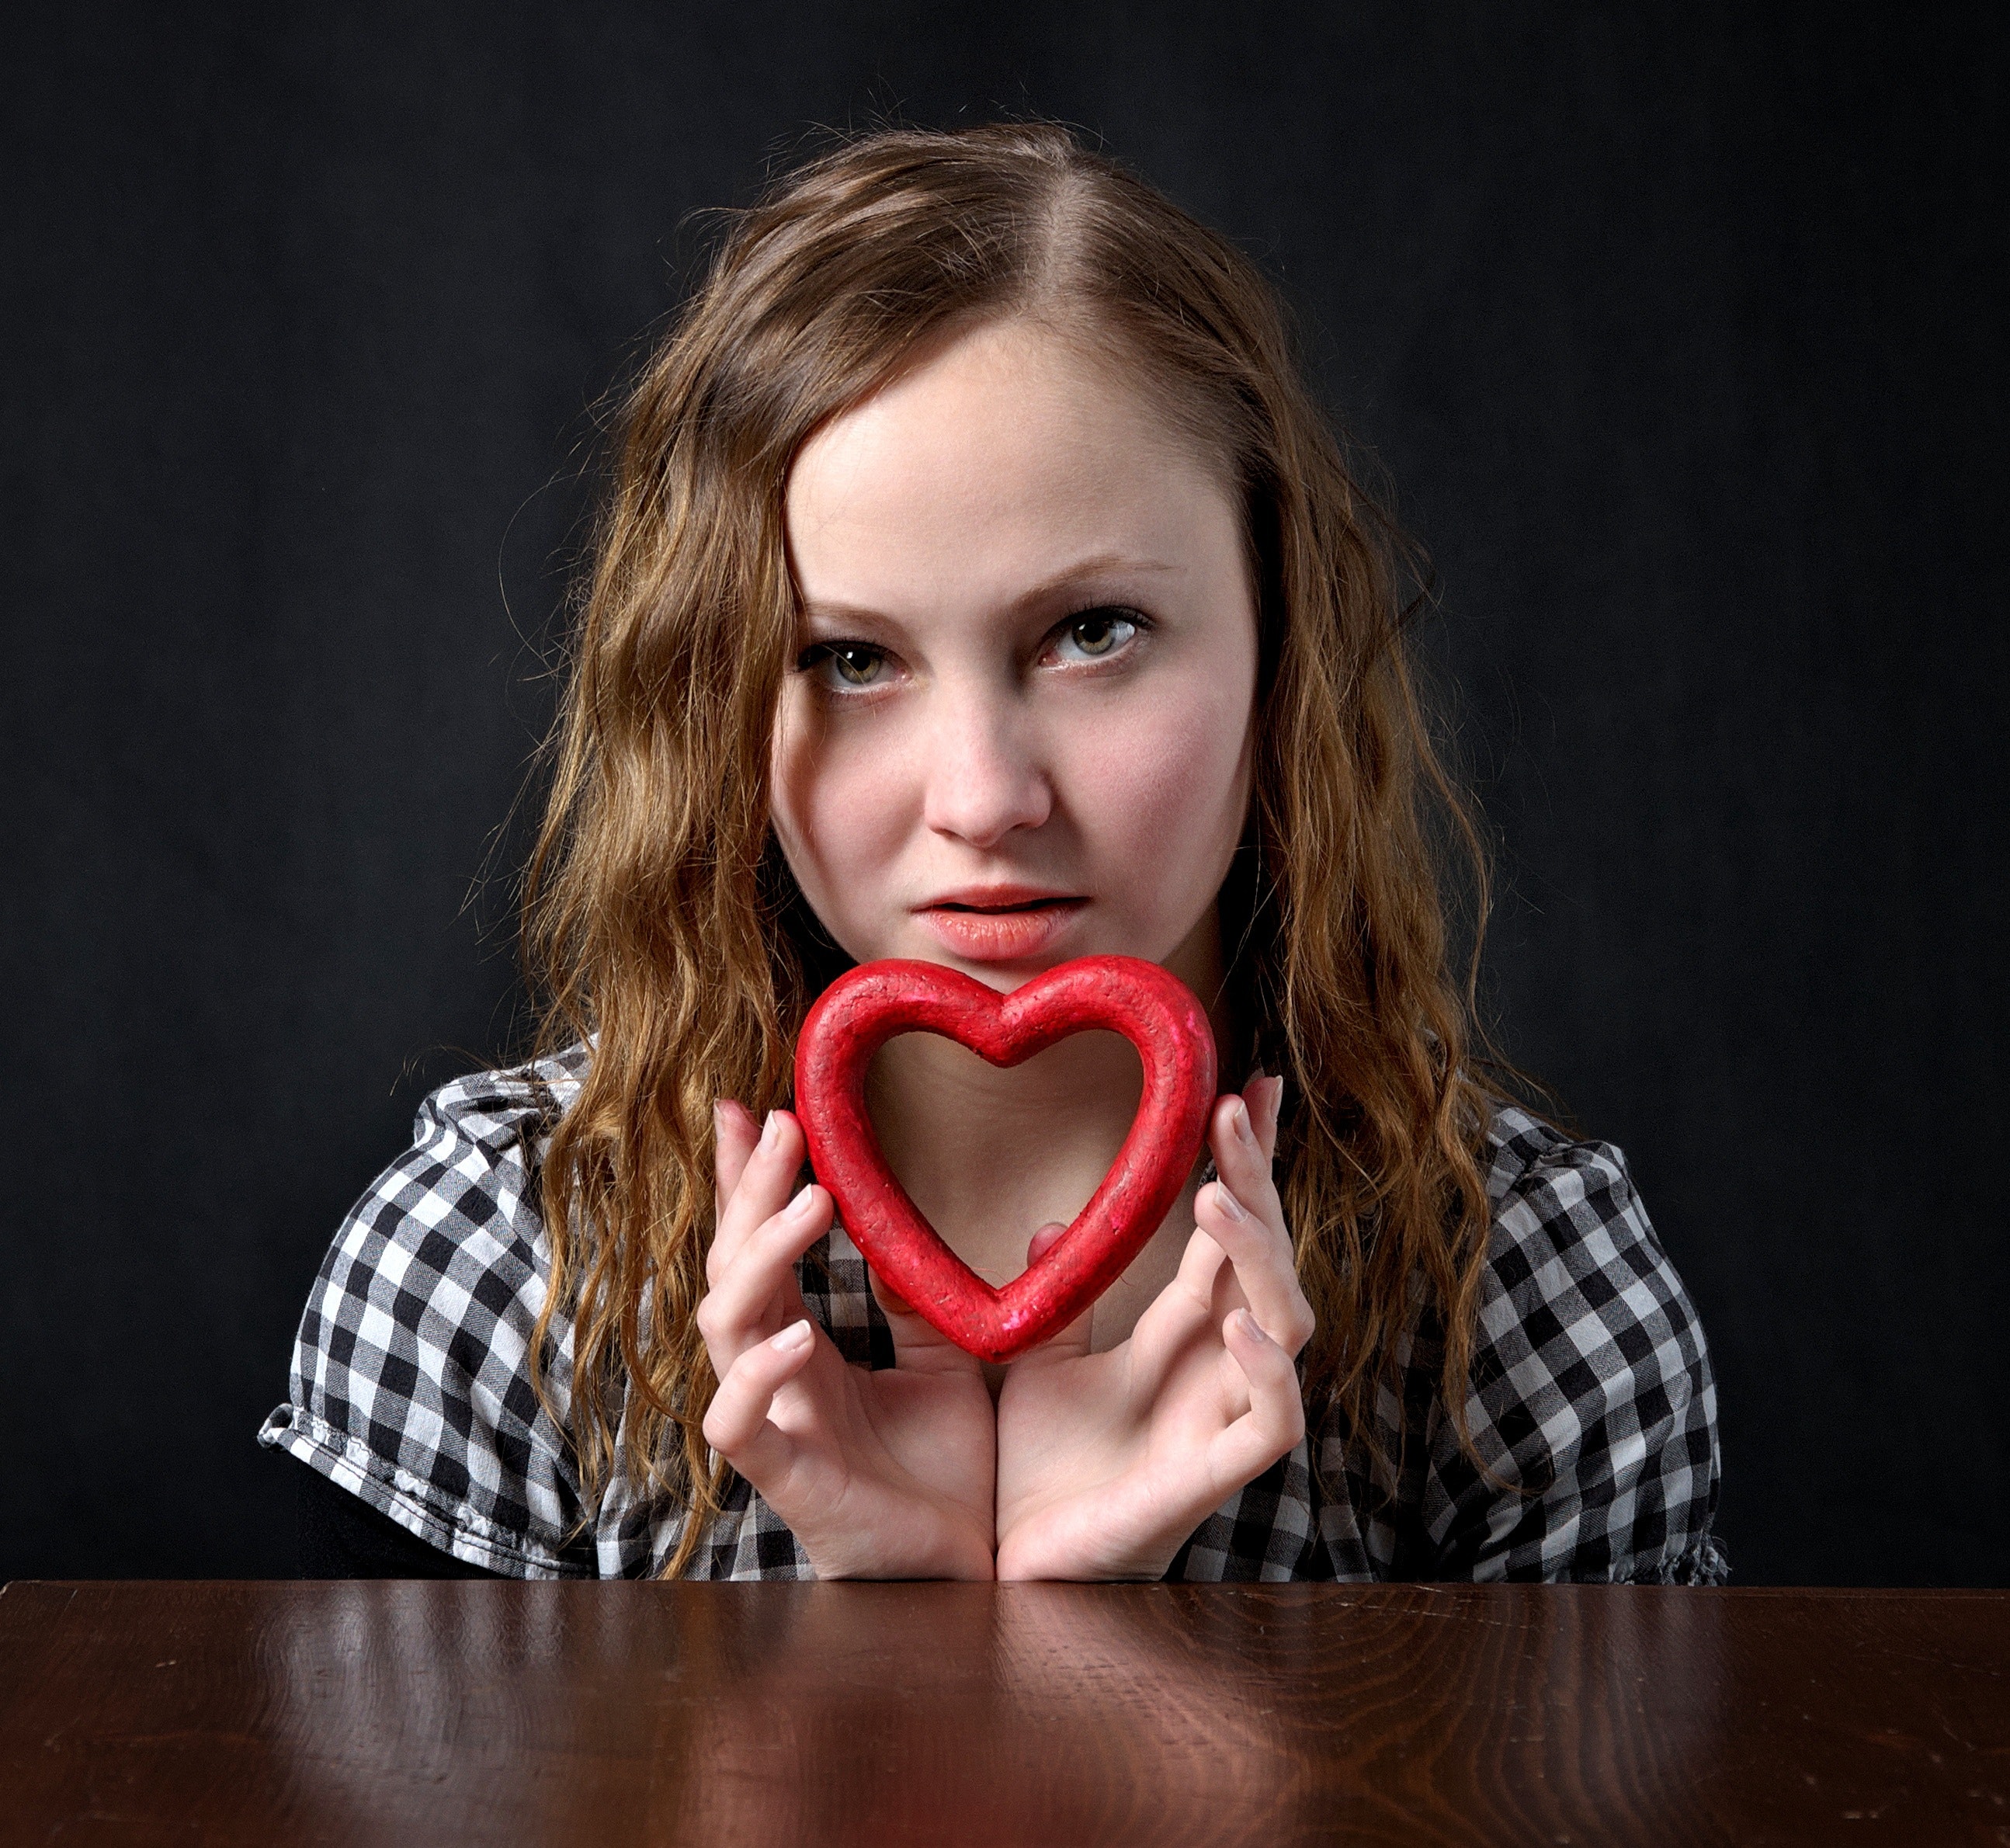 Woman holding red heart shape ornament photo